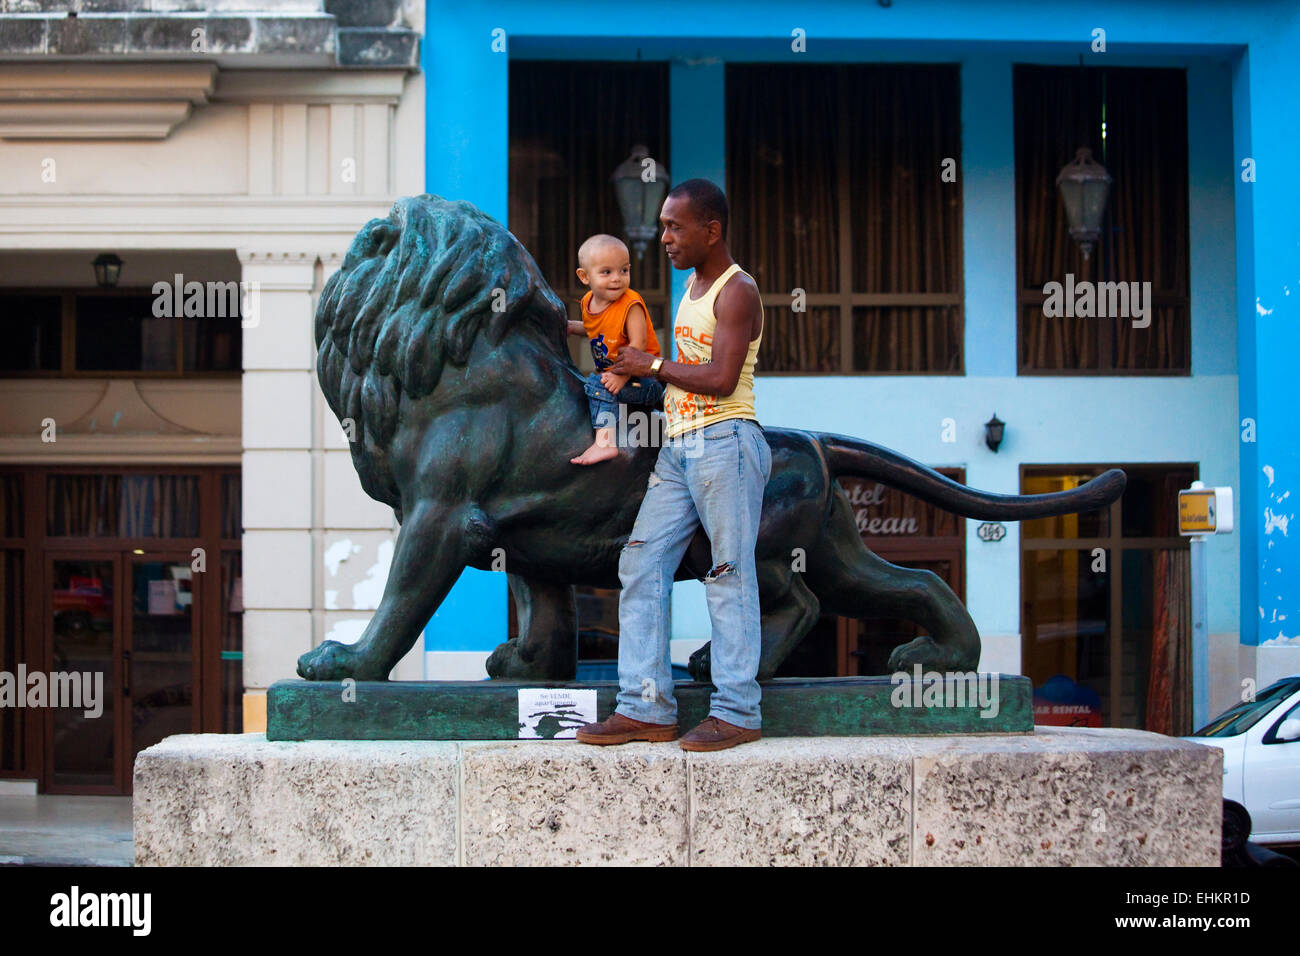 Father and son play on the lion statue on the Prado, Havana, Cuba Stock Photo